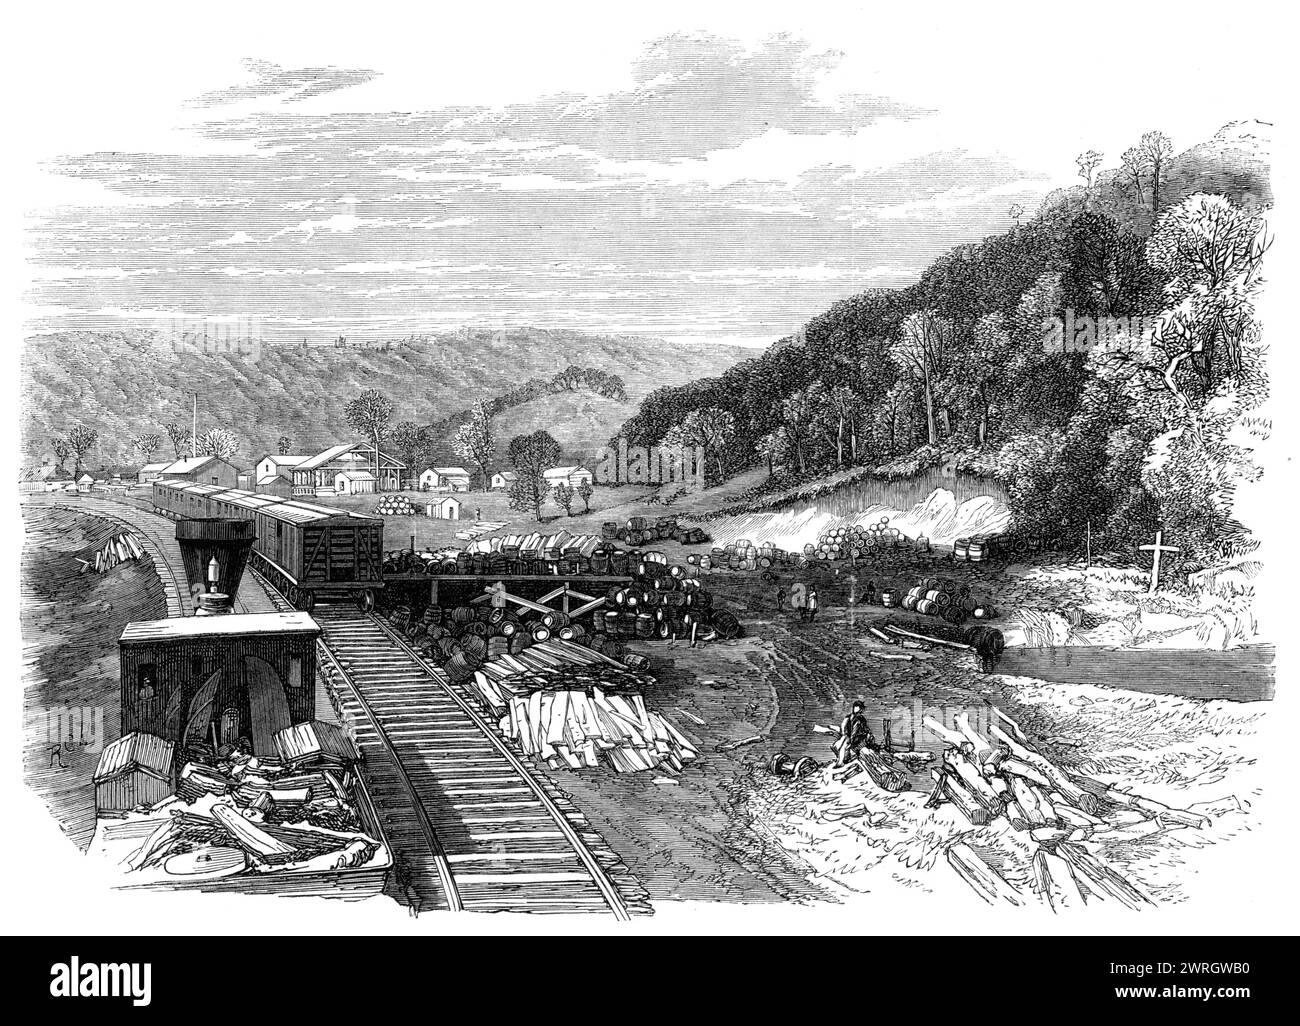 Railway Station at the Franklin Petroleum Oil Works, Pennsylvania, 1864. 'The casks or barrels of crude oil are conveyed from the Franklin and Titusville stations by the Atlantic and Great Western Railway...Two hundred miles of railway were constructed in as many days before the end of 1862, and 145 miles were added [in] 1863. The line is now opened throughout its entire length, traversing the fertile States of Pennsylvania and Ohio, and enabling goods or passengers to travel from New York to St. Louis, near the confluence of the Mississippi and Missouri, without a change of carriage...During Stock Photo